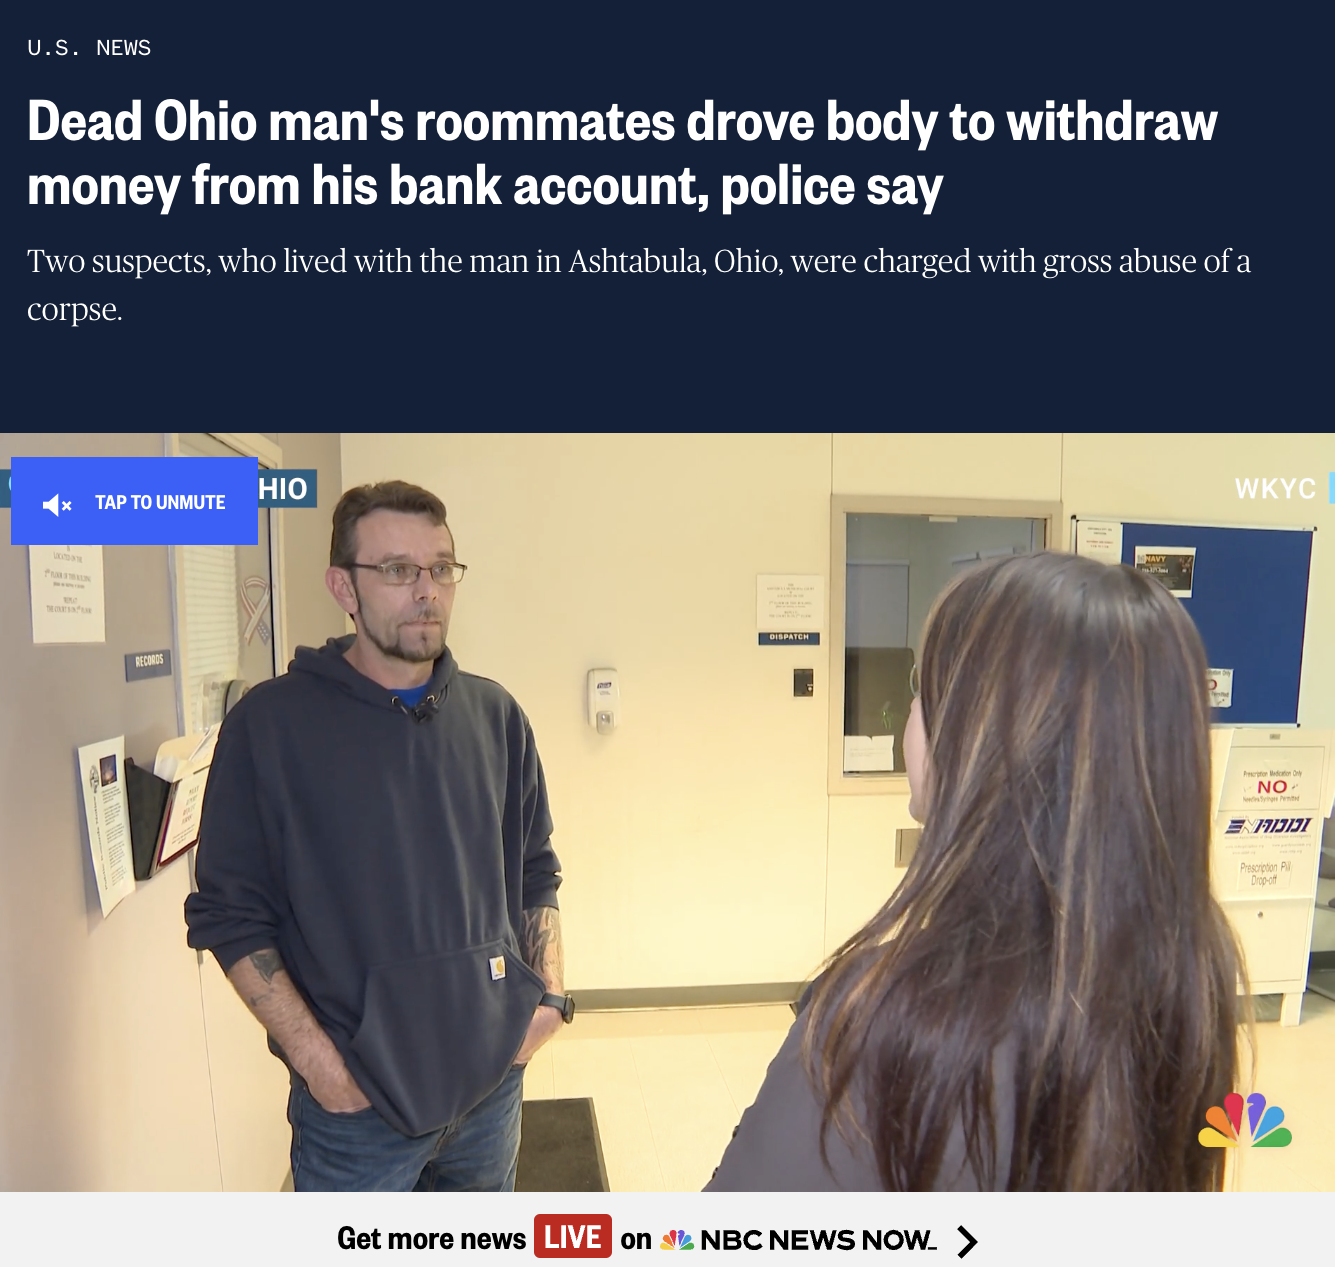 presentation - U.S. News Dead Ohio man's roommates drove body to withdraw money from his bank account, police say Two suspects, who lived with the man in Ashtabula, Ohio, were charged with gross abuse of a corpse. Tap To Unmute Hio B Get more news Live on